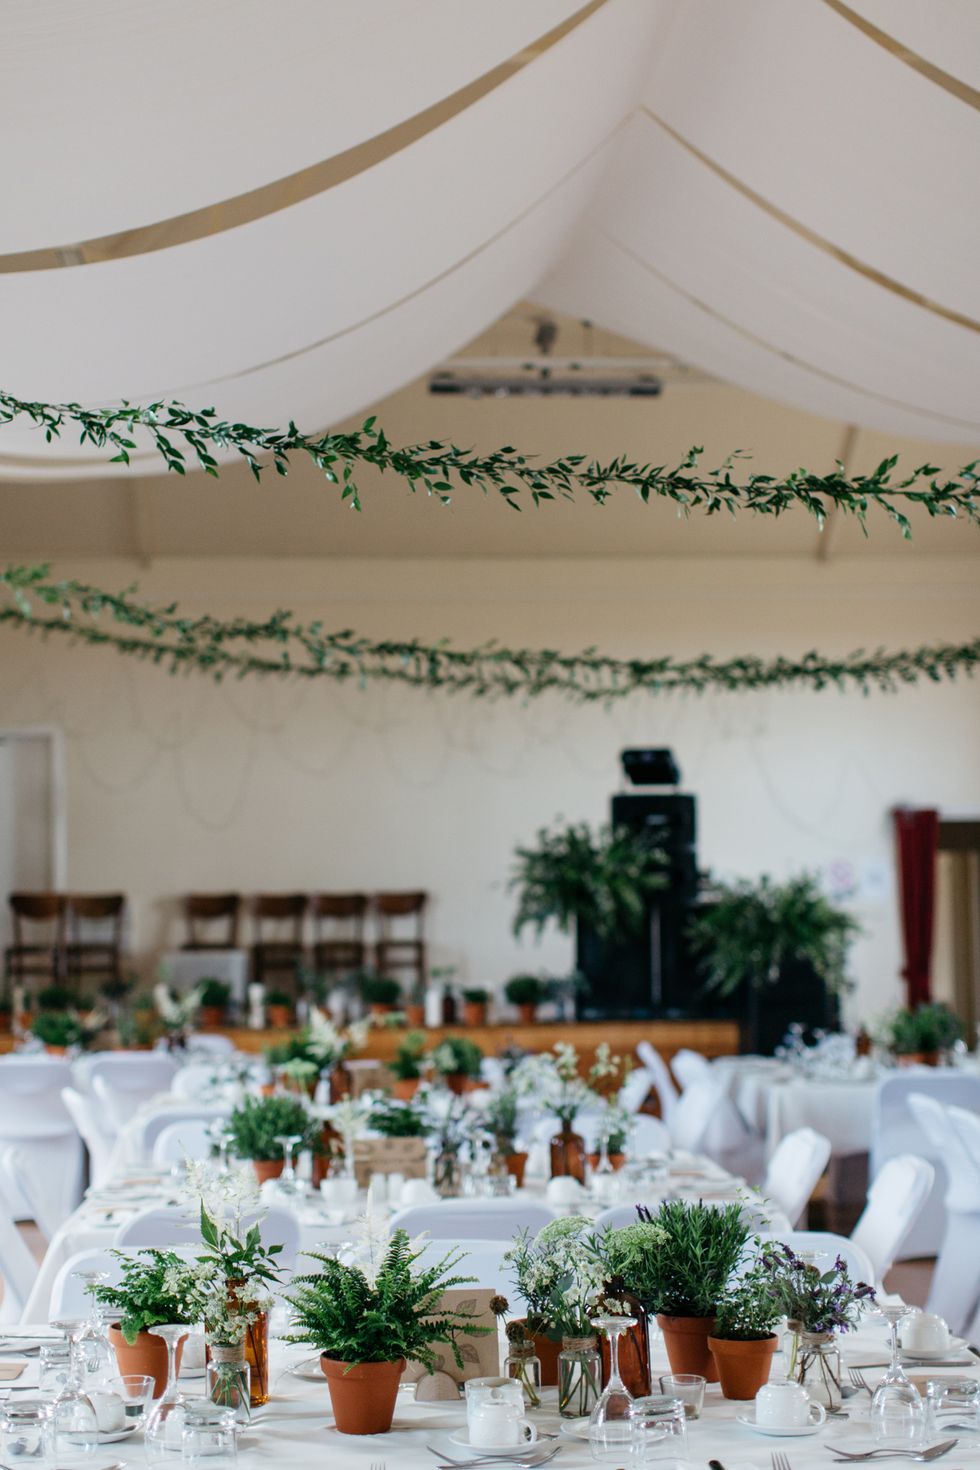 2017 Trends: Organic Inspired Olive Branch Wedding Ideas